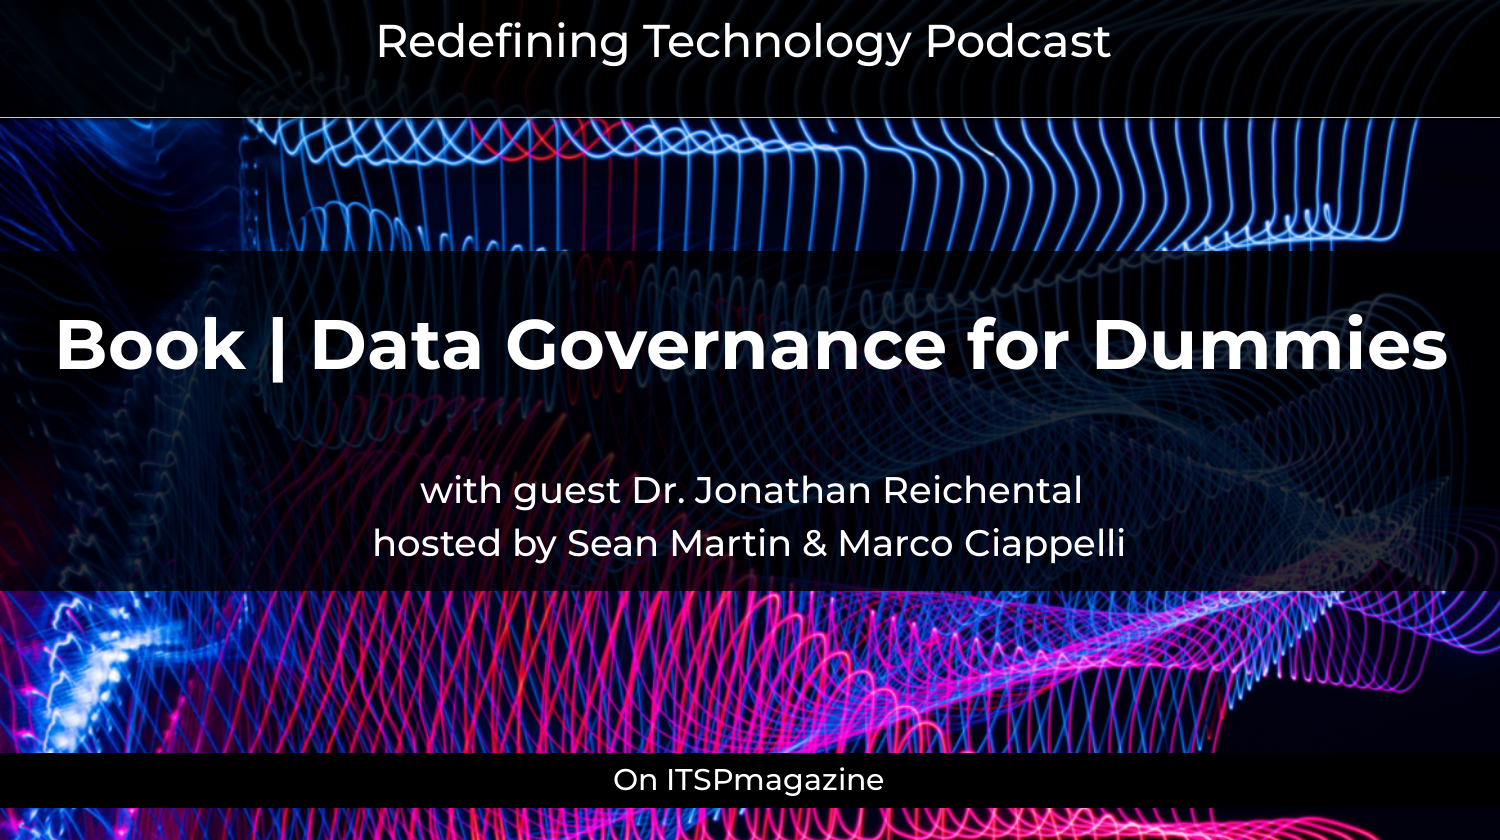 PODCAST: Redefining Technology – Discussion on Data